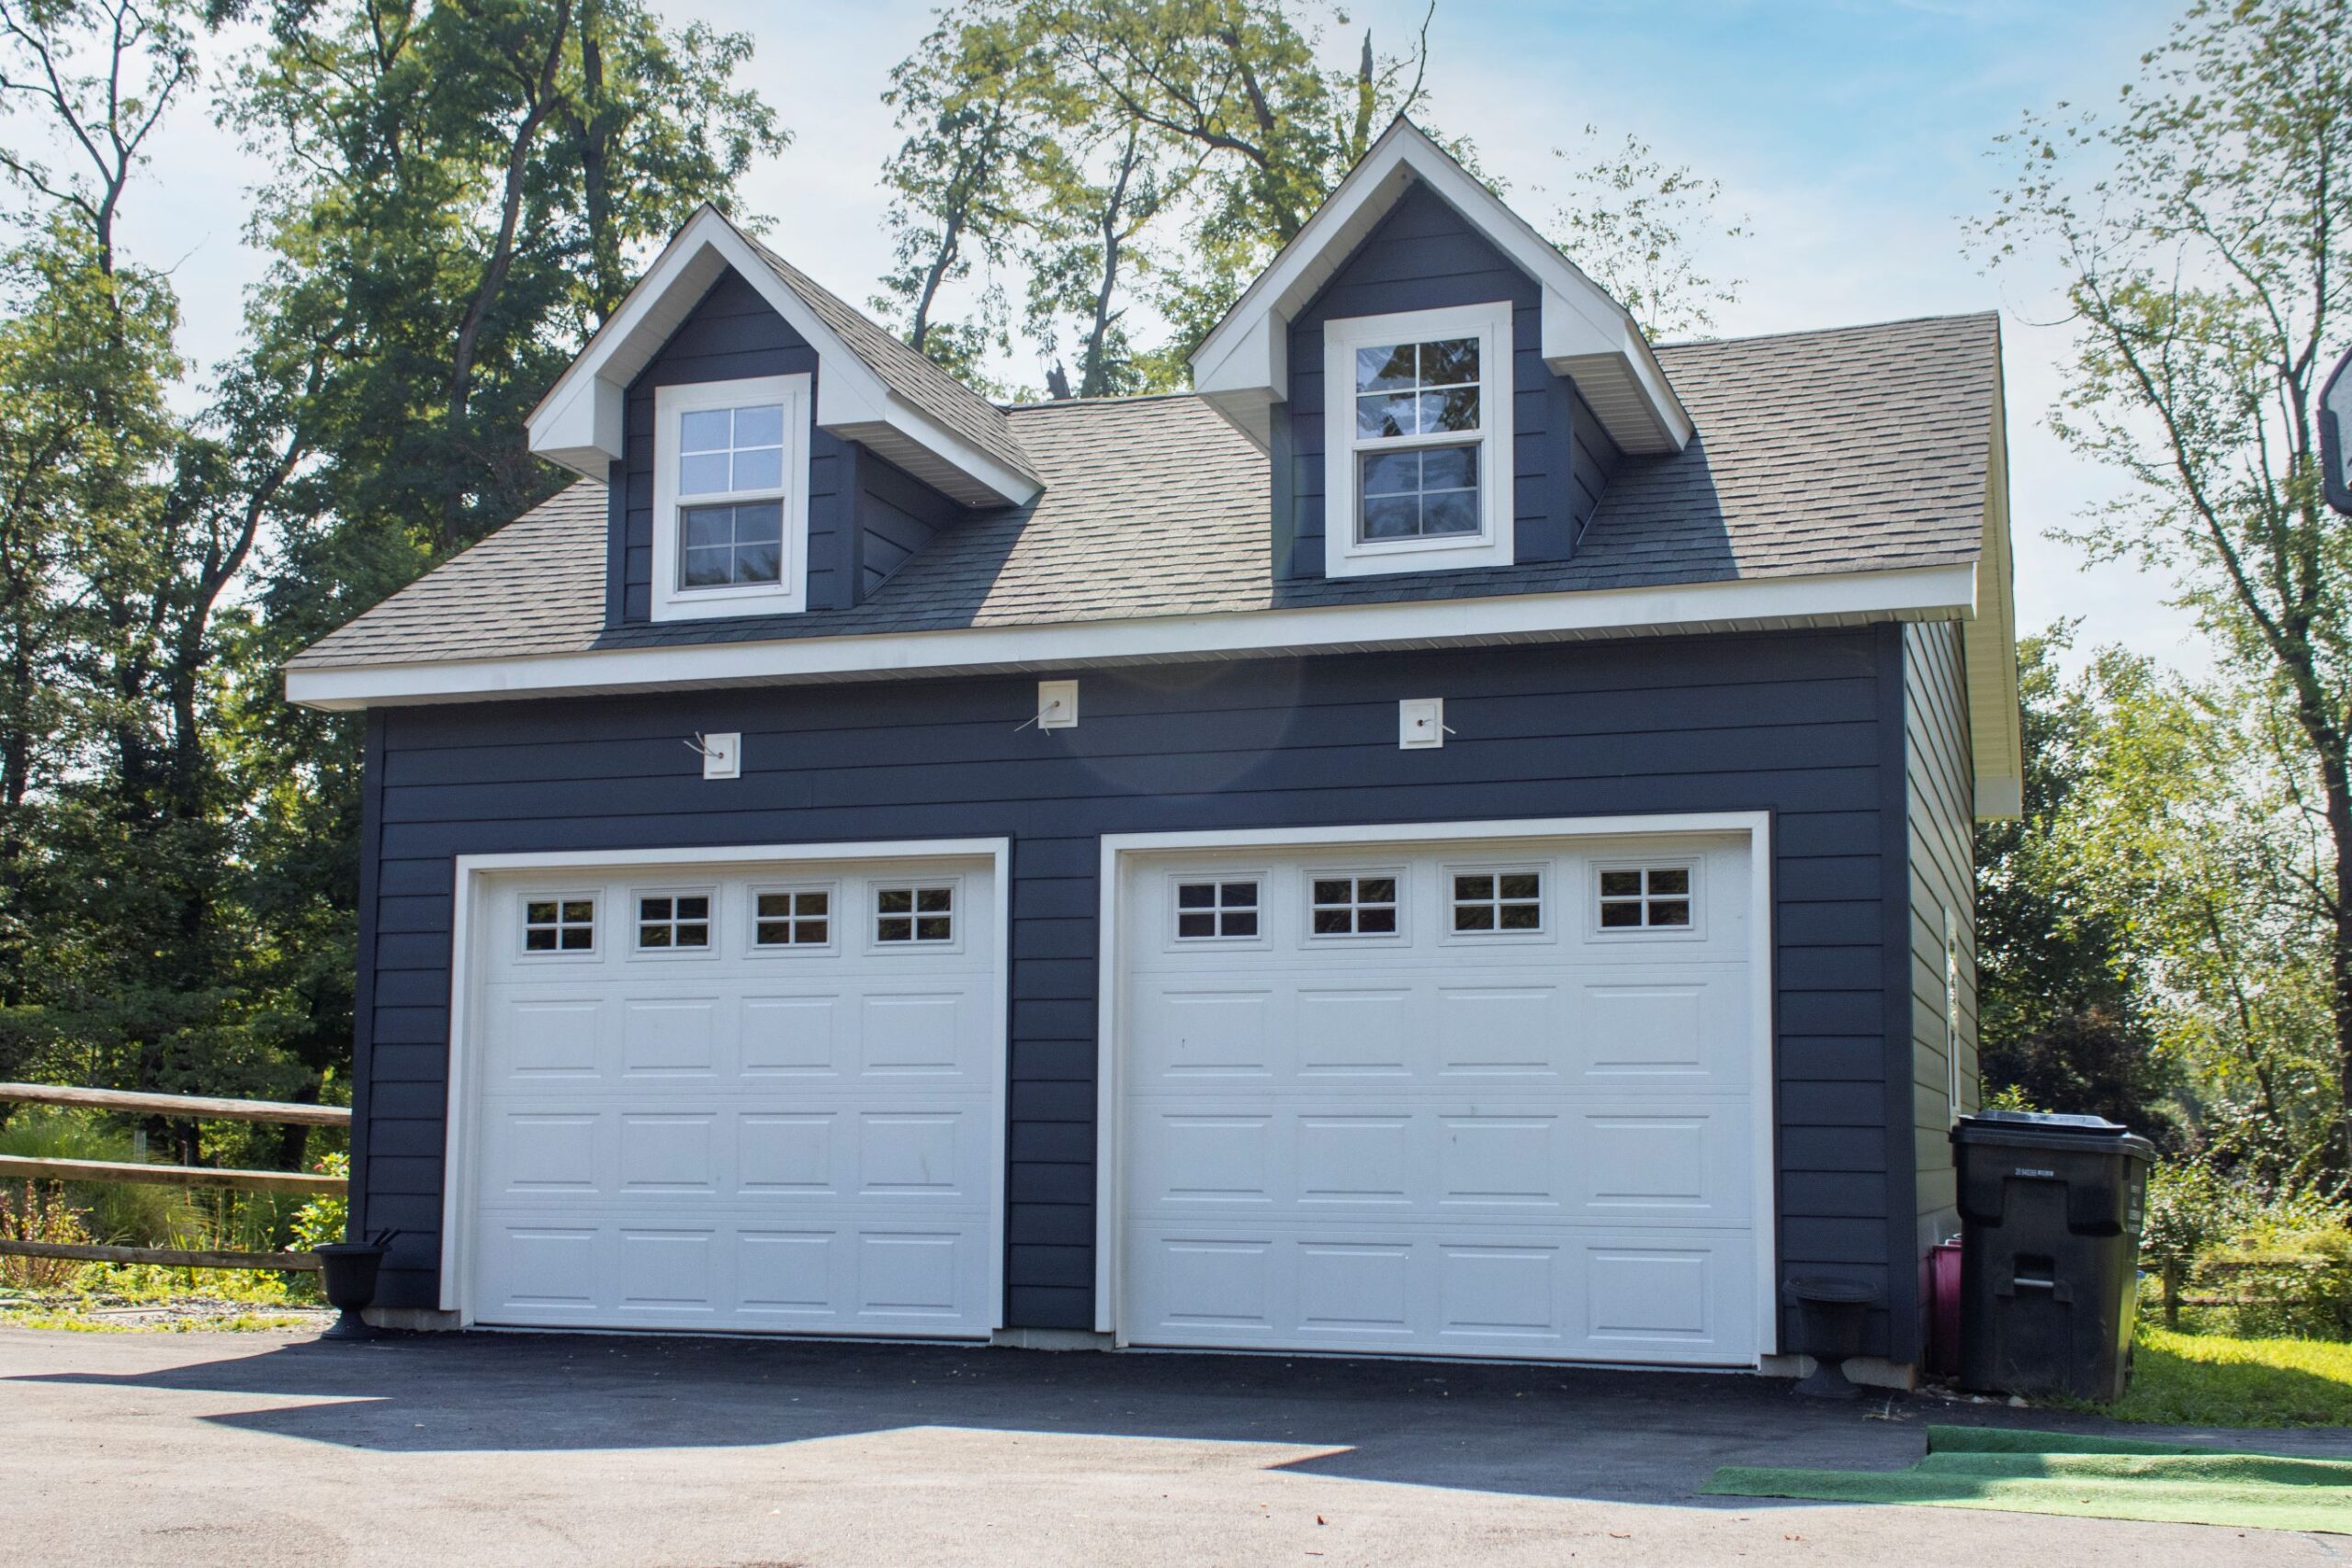 Exterior of a 2-story, 2-car Garden Shed Garage with blue siding and white garage doors.